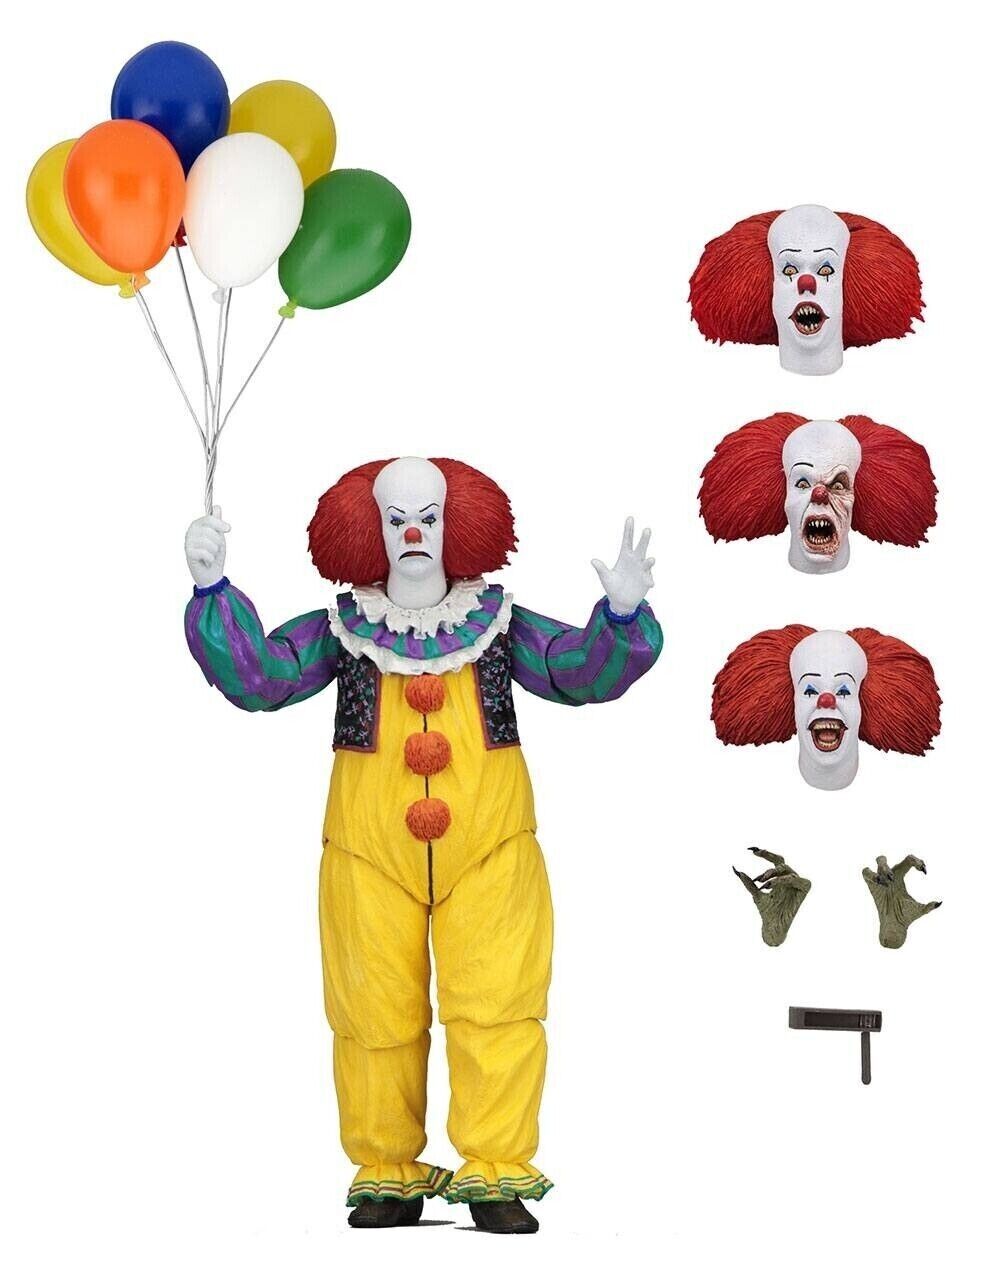 NECA 1990 Pennywise Stephen King’s IT Balloons 7" Action Figure